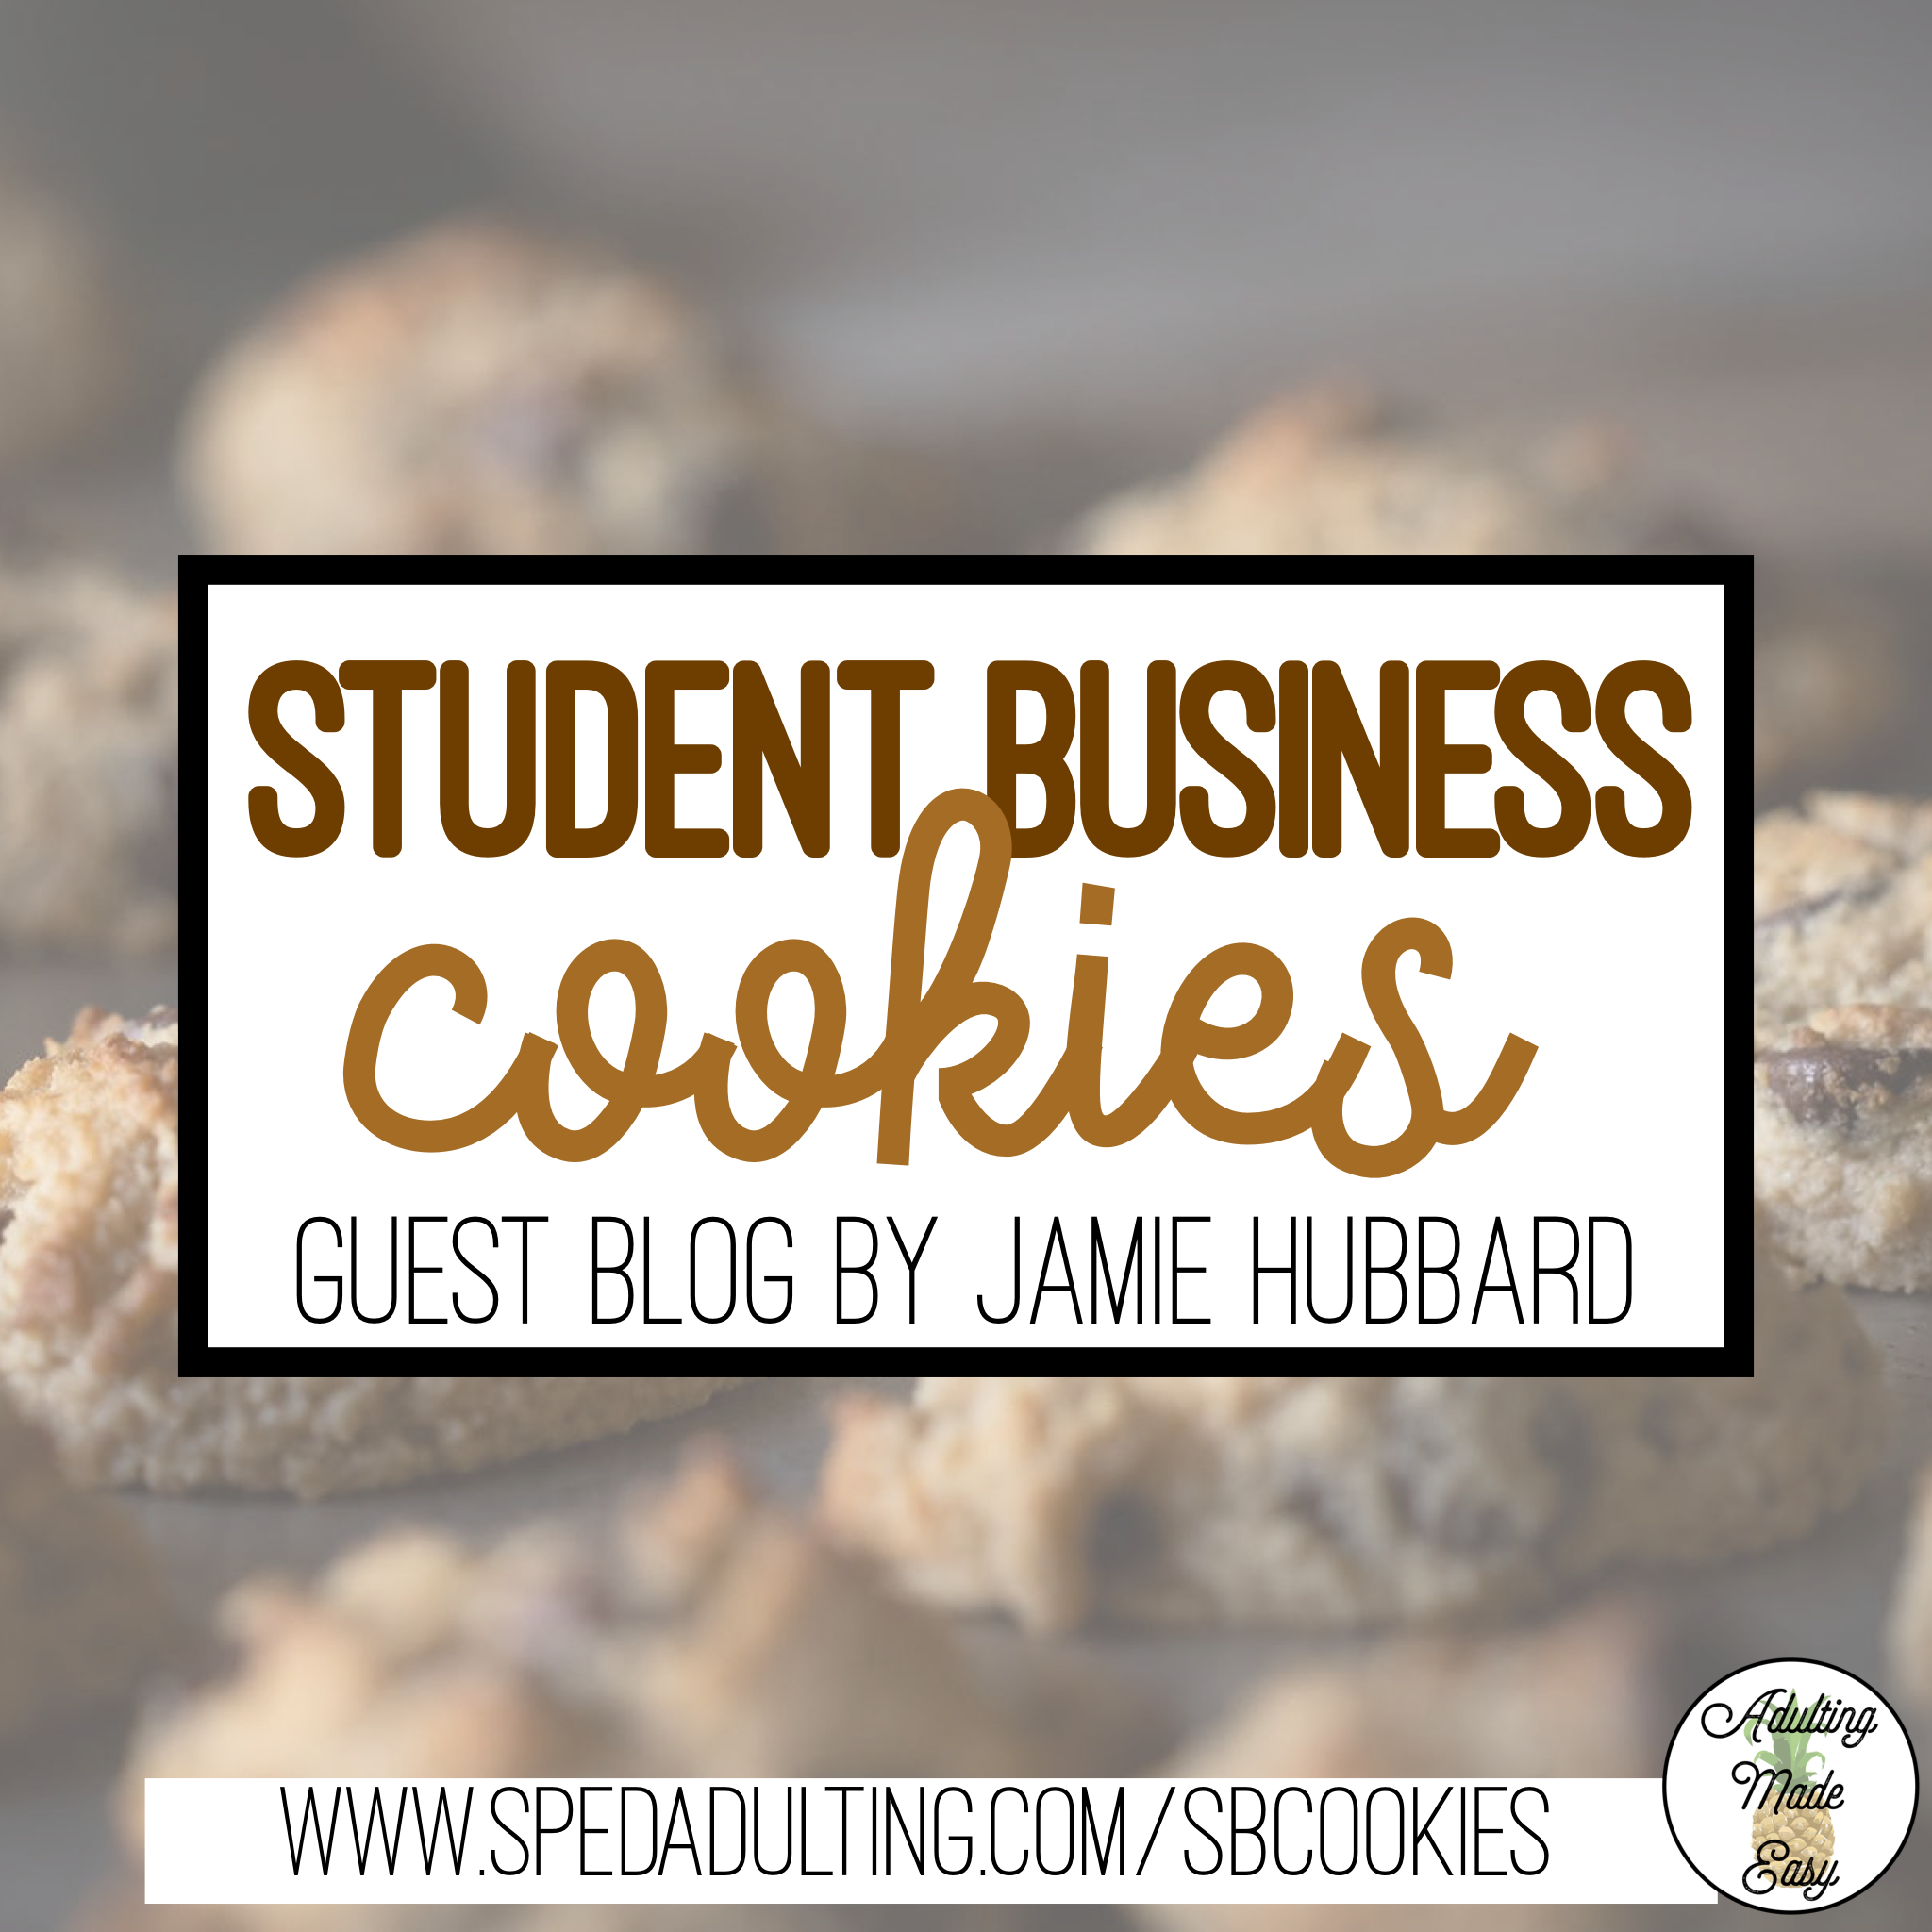 BLOG: Special Education Student Business selling cookies